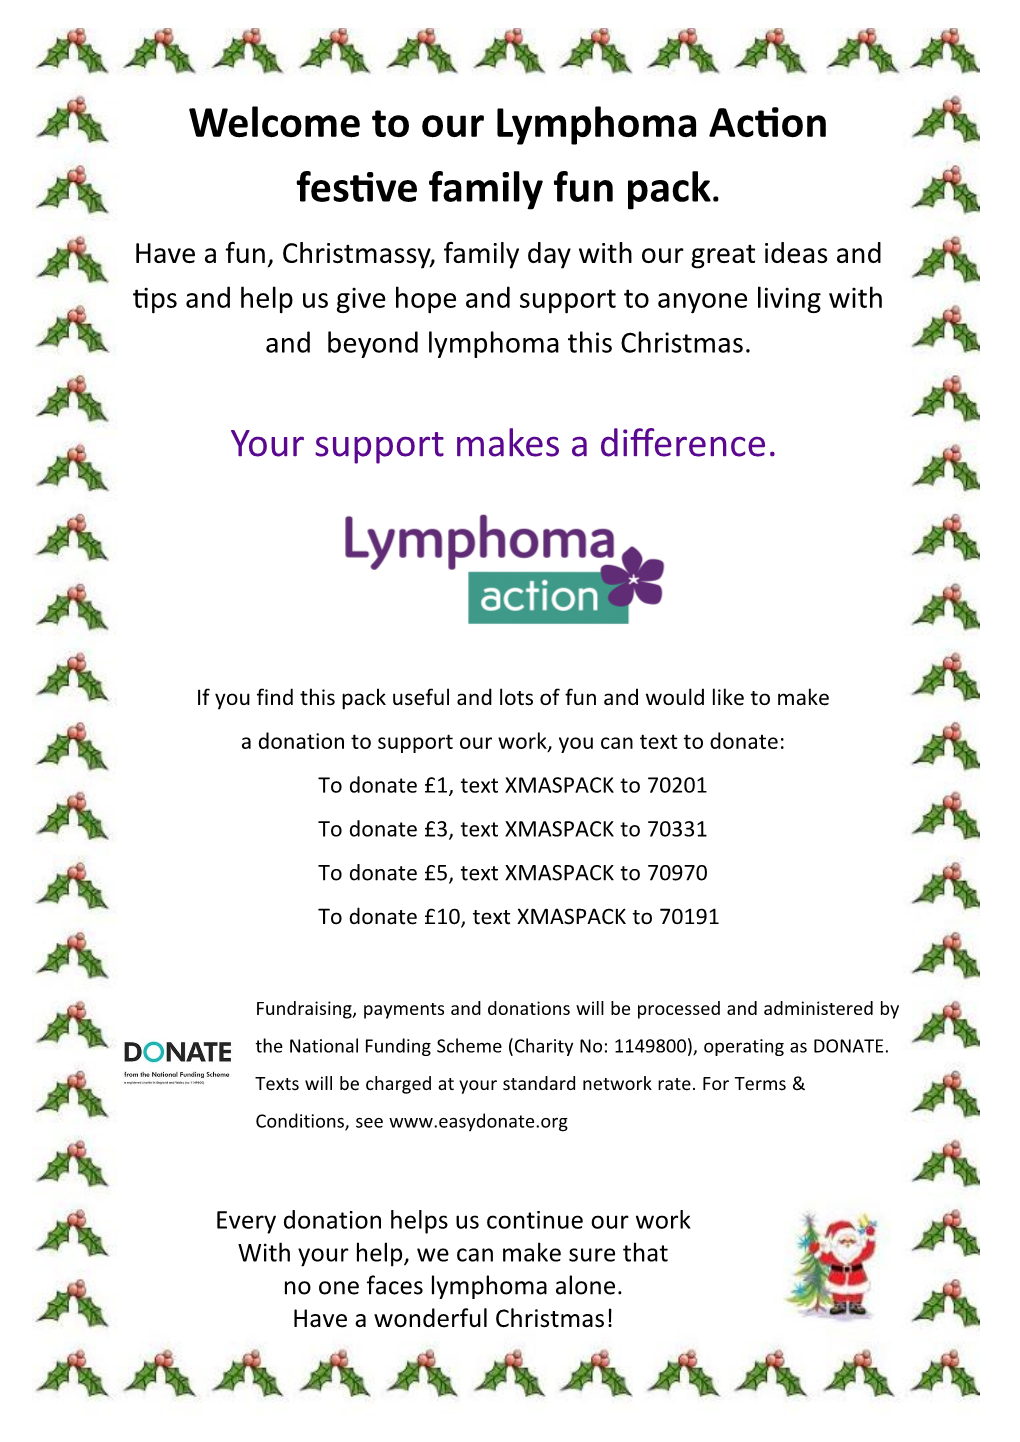 Welcome to Our Lymphoma Action Festive Family Fun Pack